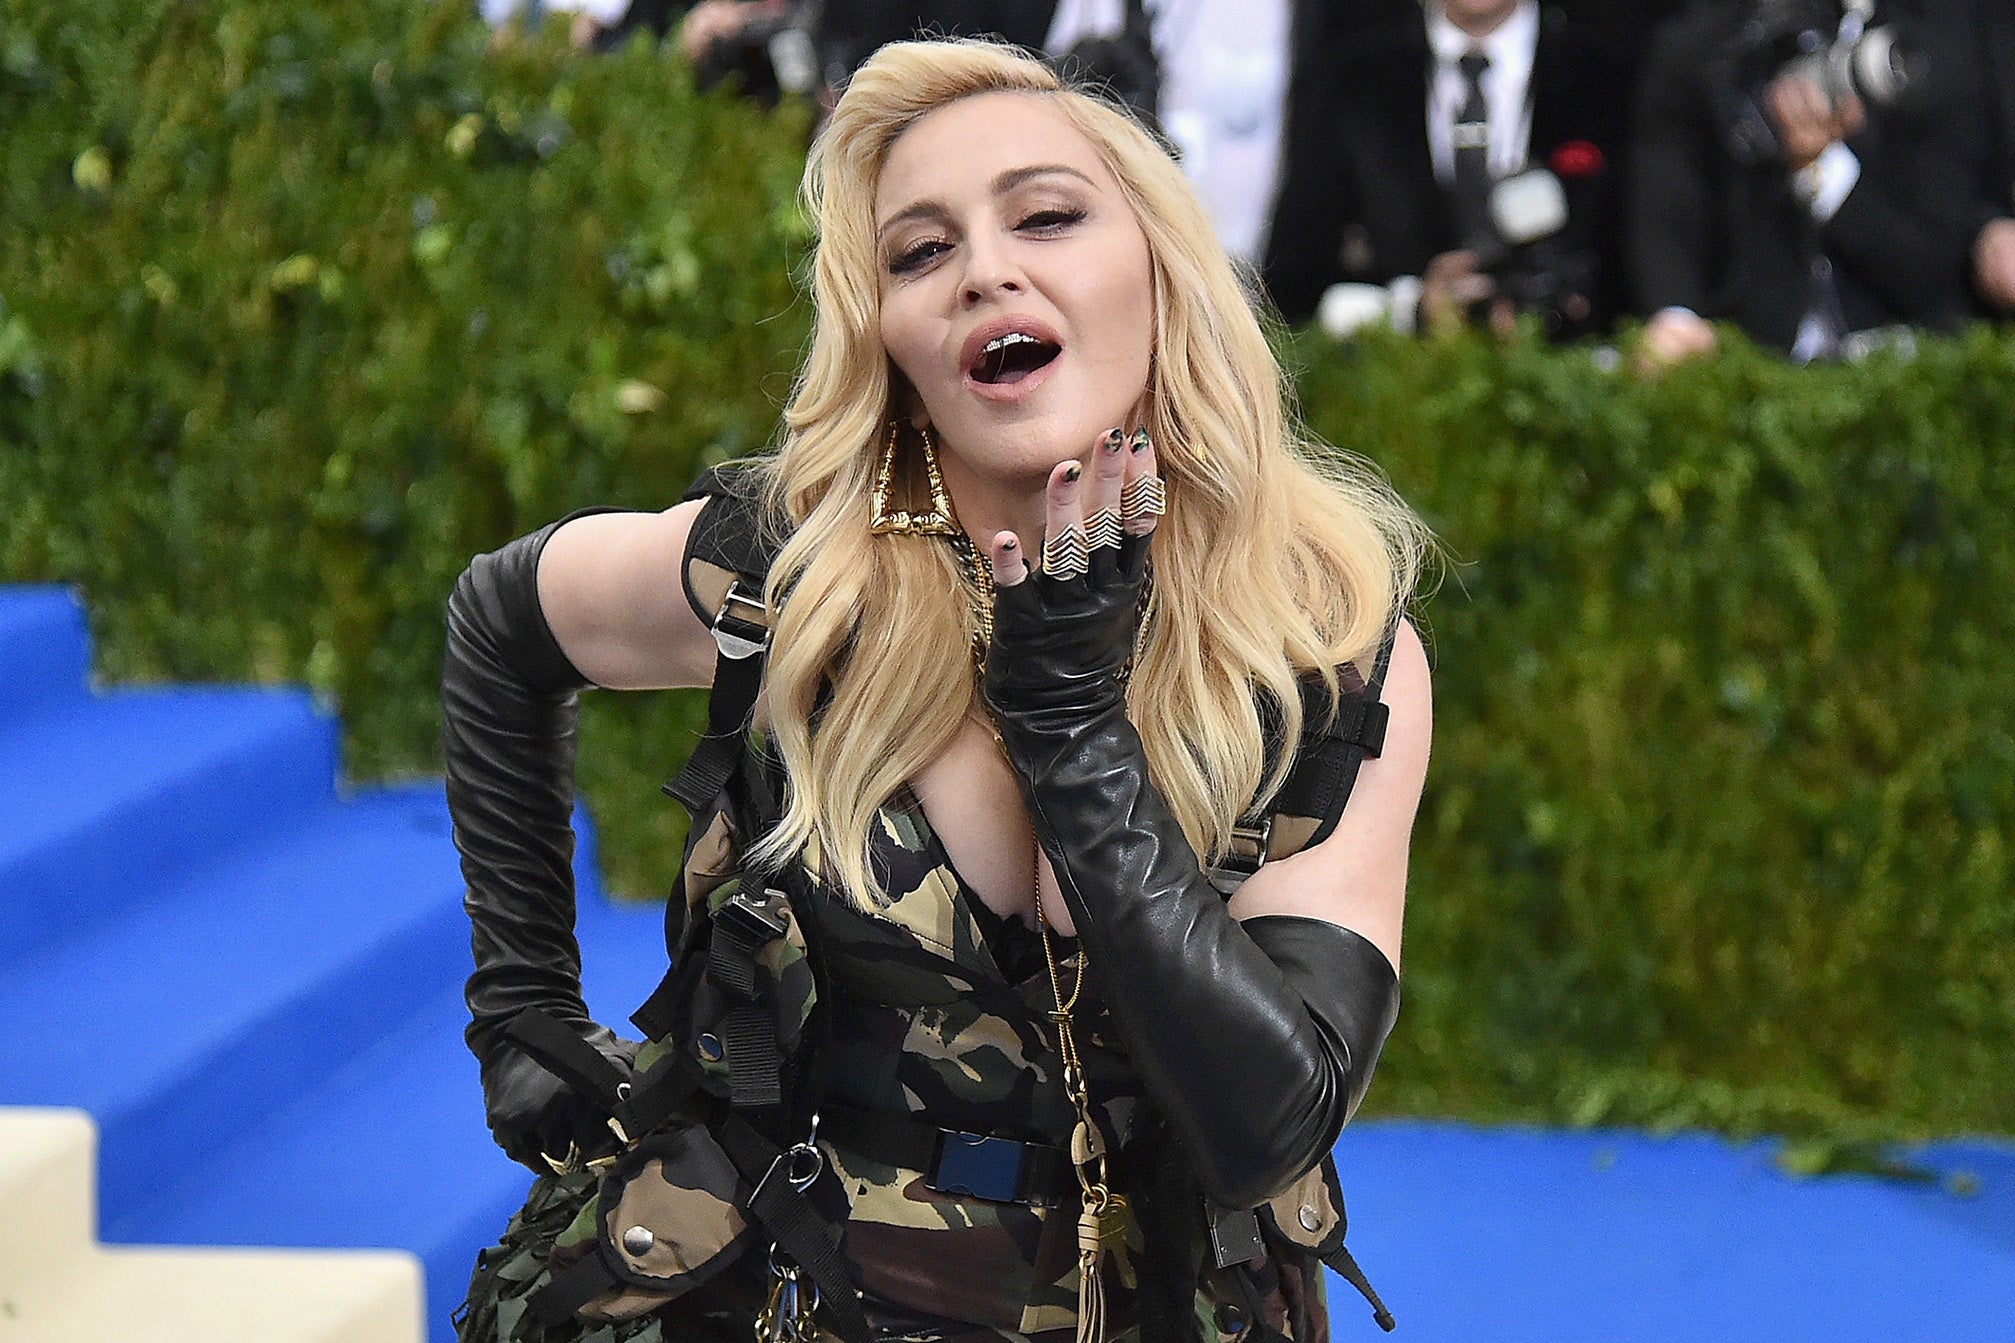 Madonna. Credit: Mike Coppola/Getty Images for People.com